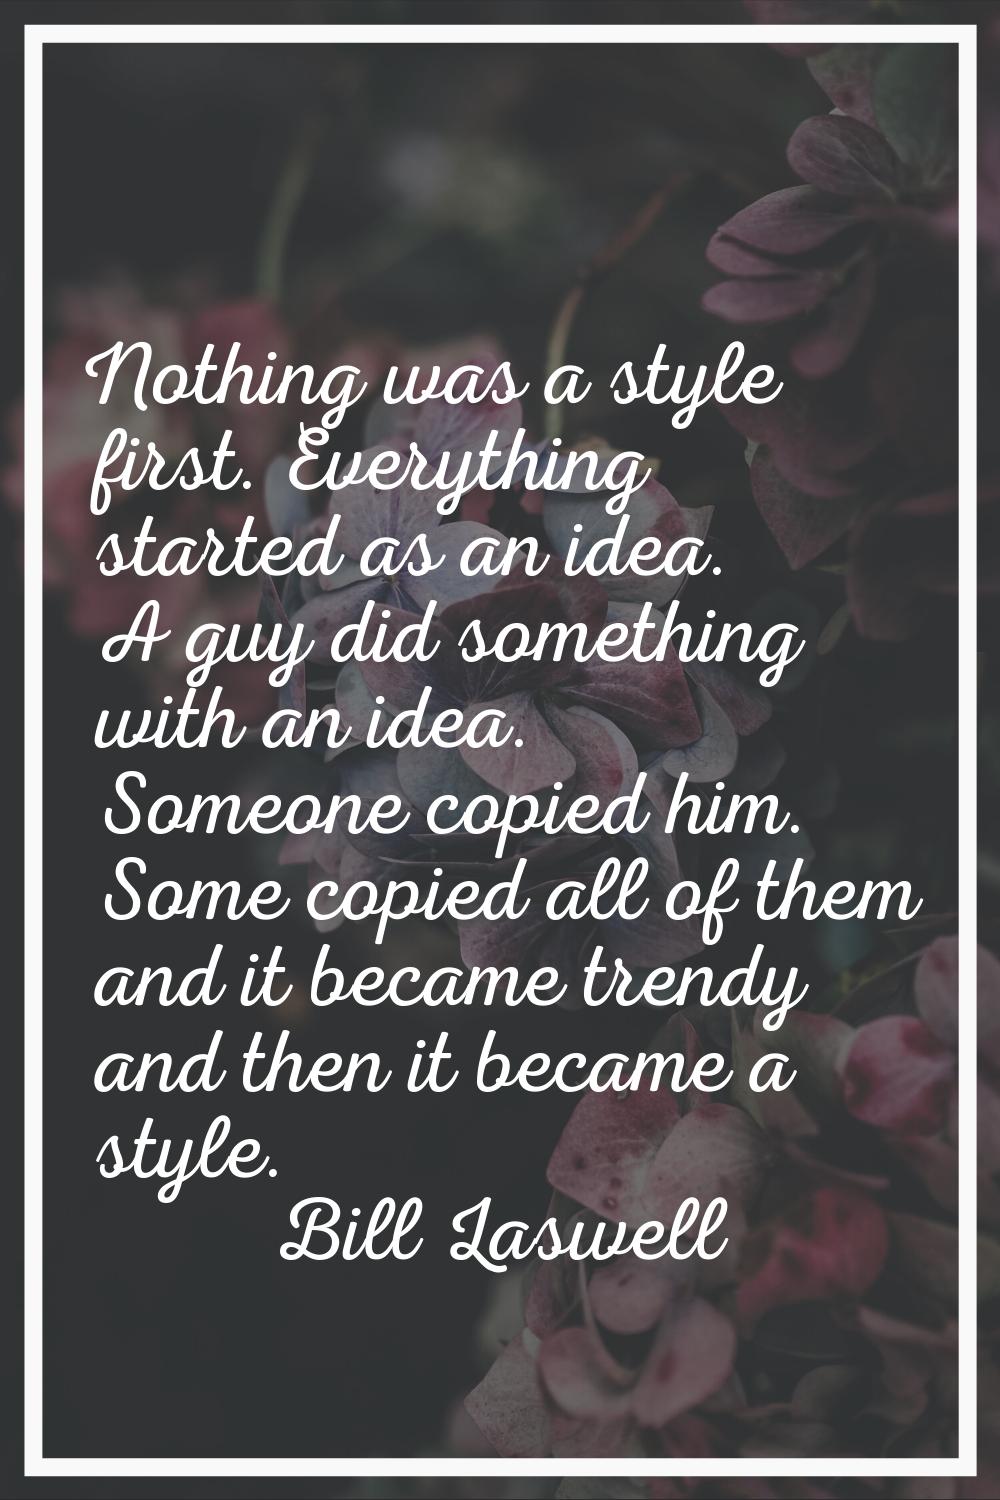 Nothing was a style first. Everything started as an idea. A guy did something with an idea. Someone